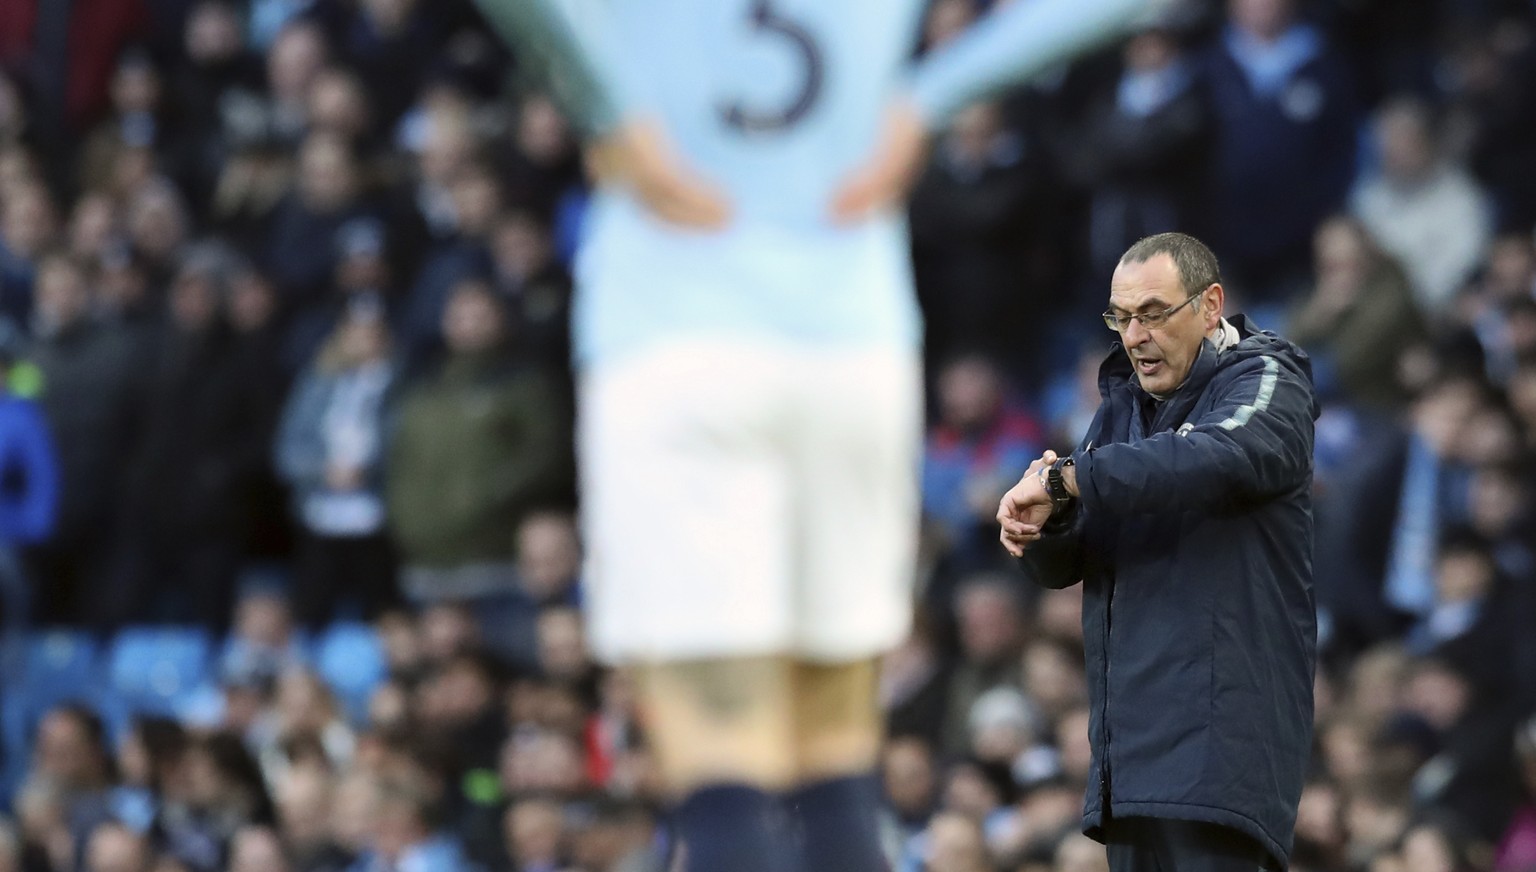 Chelsea manager Maurizio Sarri, right, reacts during the English Premier League soccer match between Manchester City and Chelsea at Etihad stadium in Manchester, England, Sunday, Feb. 10, 2019. (AP Ph ...